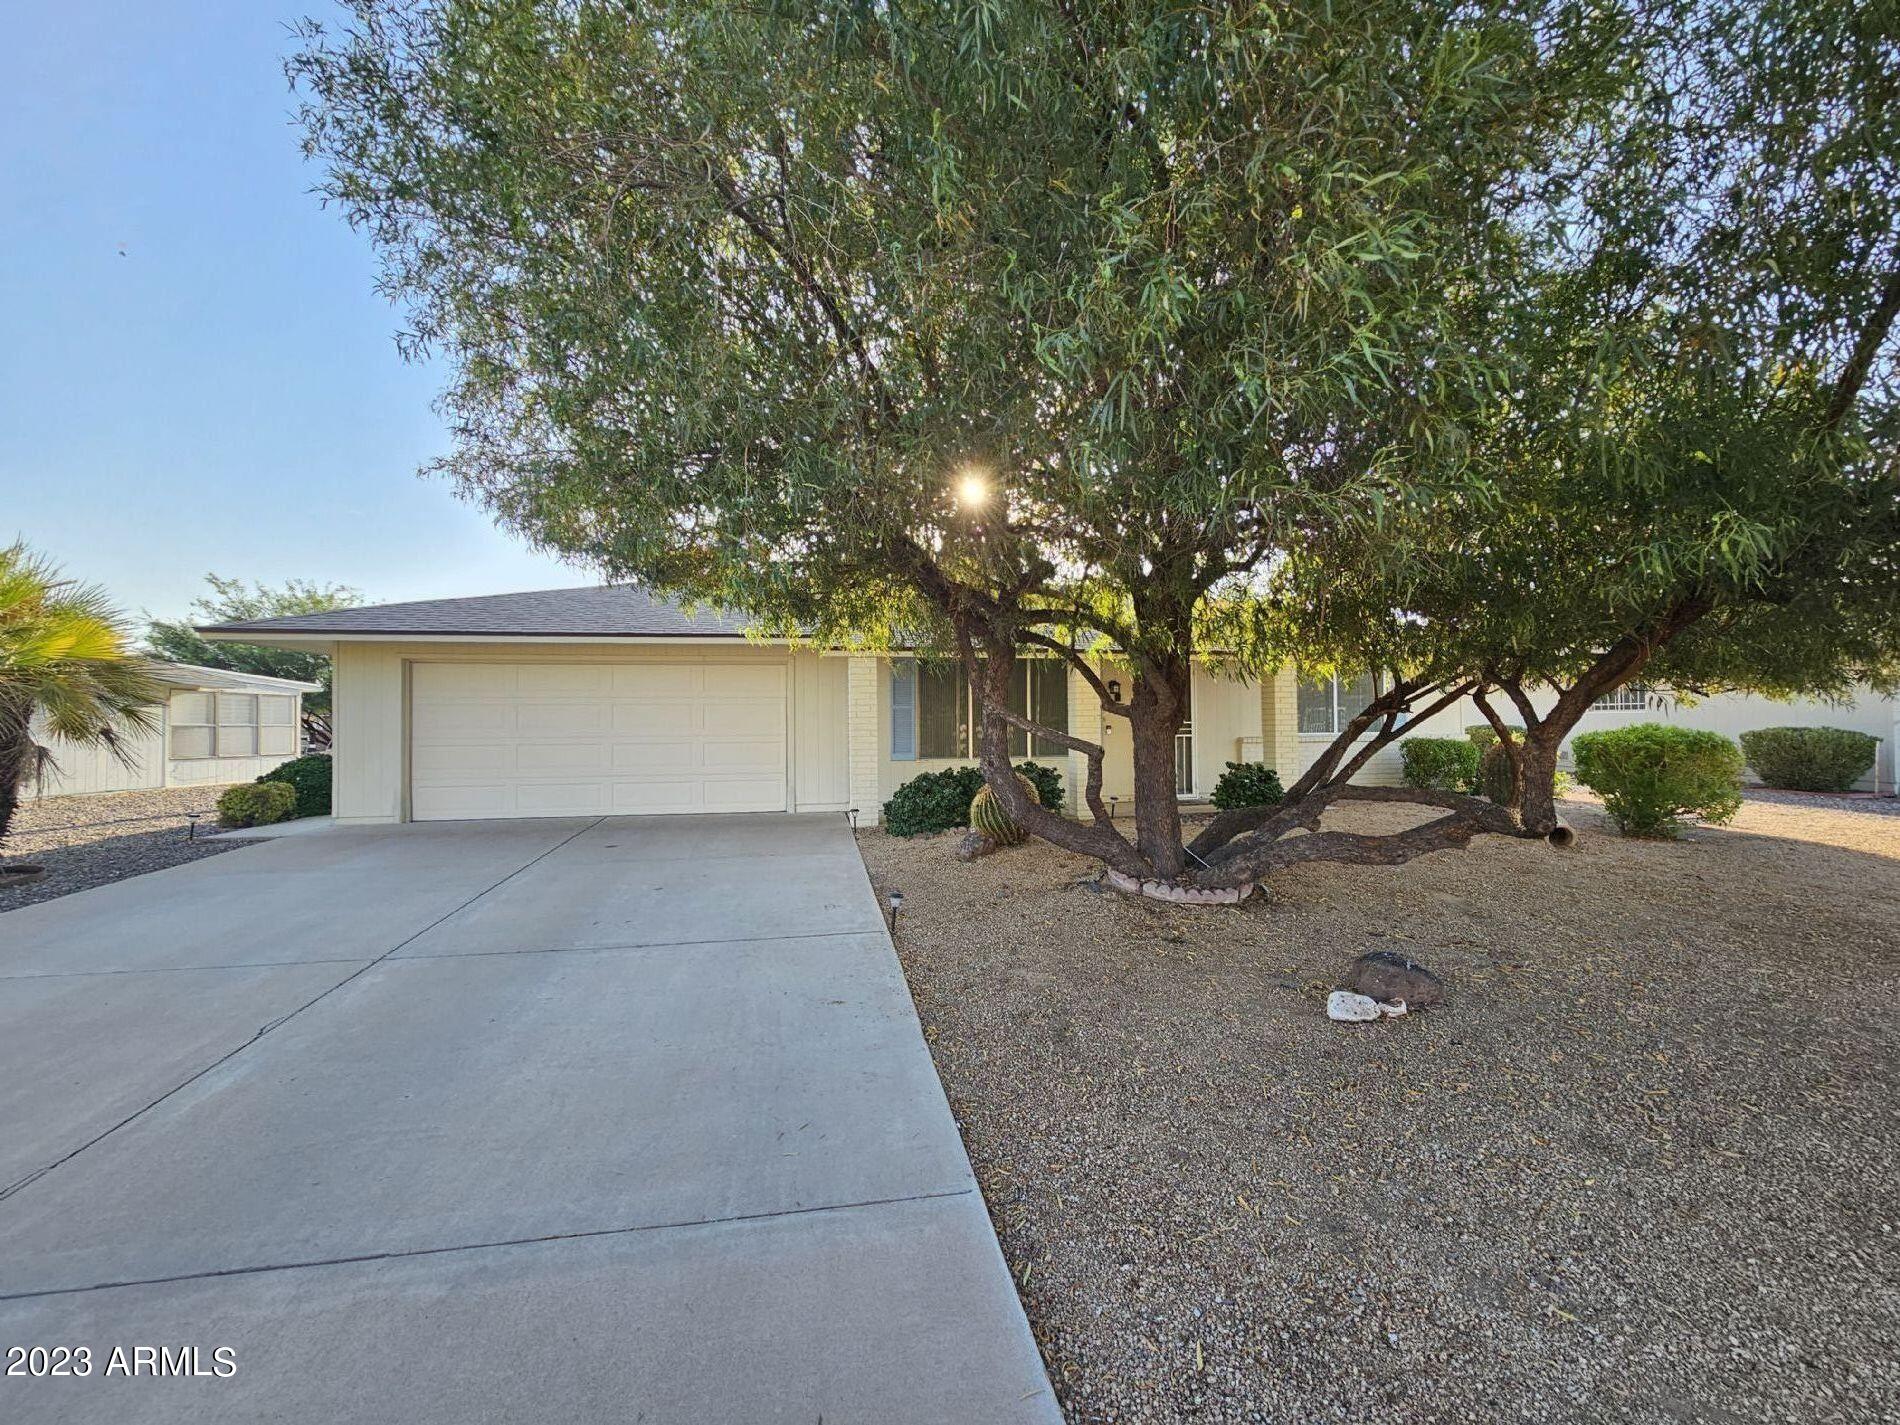 Photo 1 of 16 of 18026 N Organ Pipe Drive house